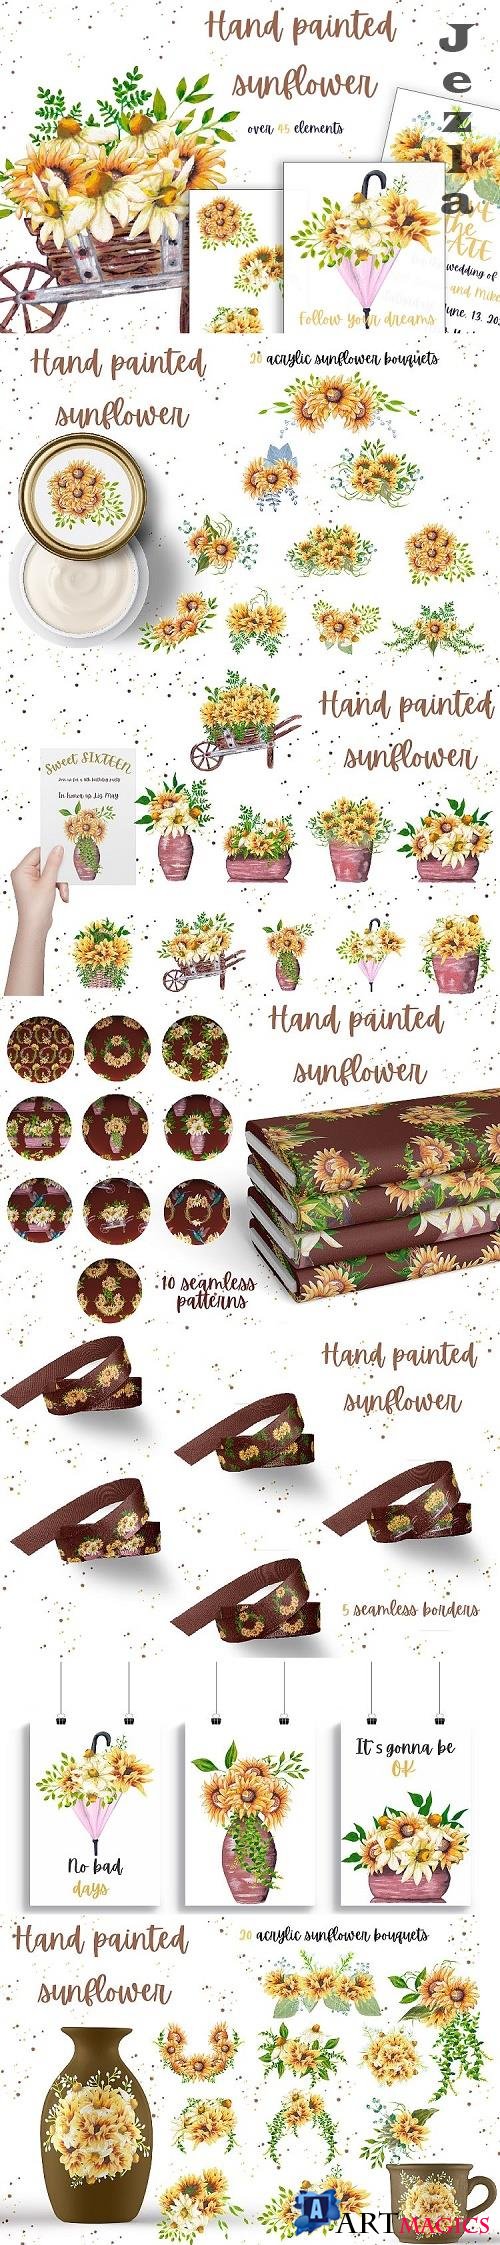 Hand painted sunflower collection - 537477